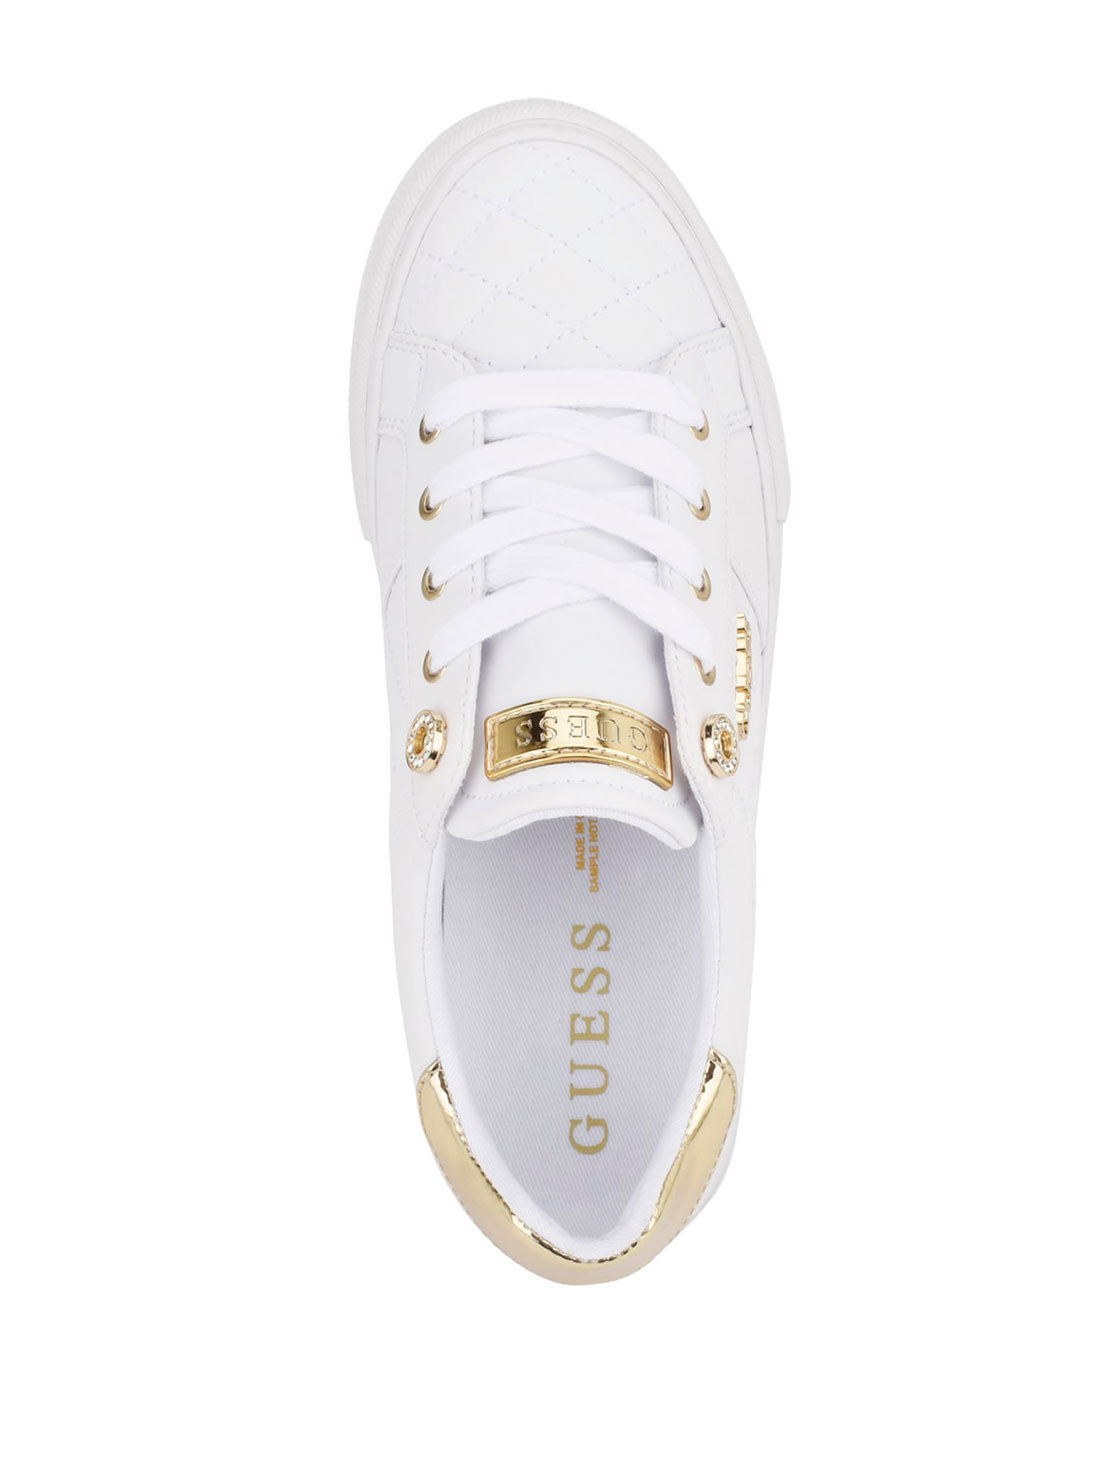 GUESS White Gold Loven Low-Top Sneakers top view